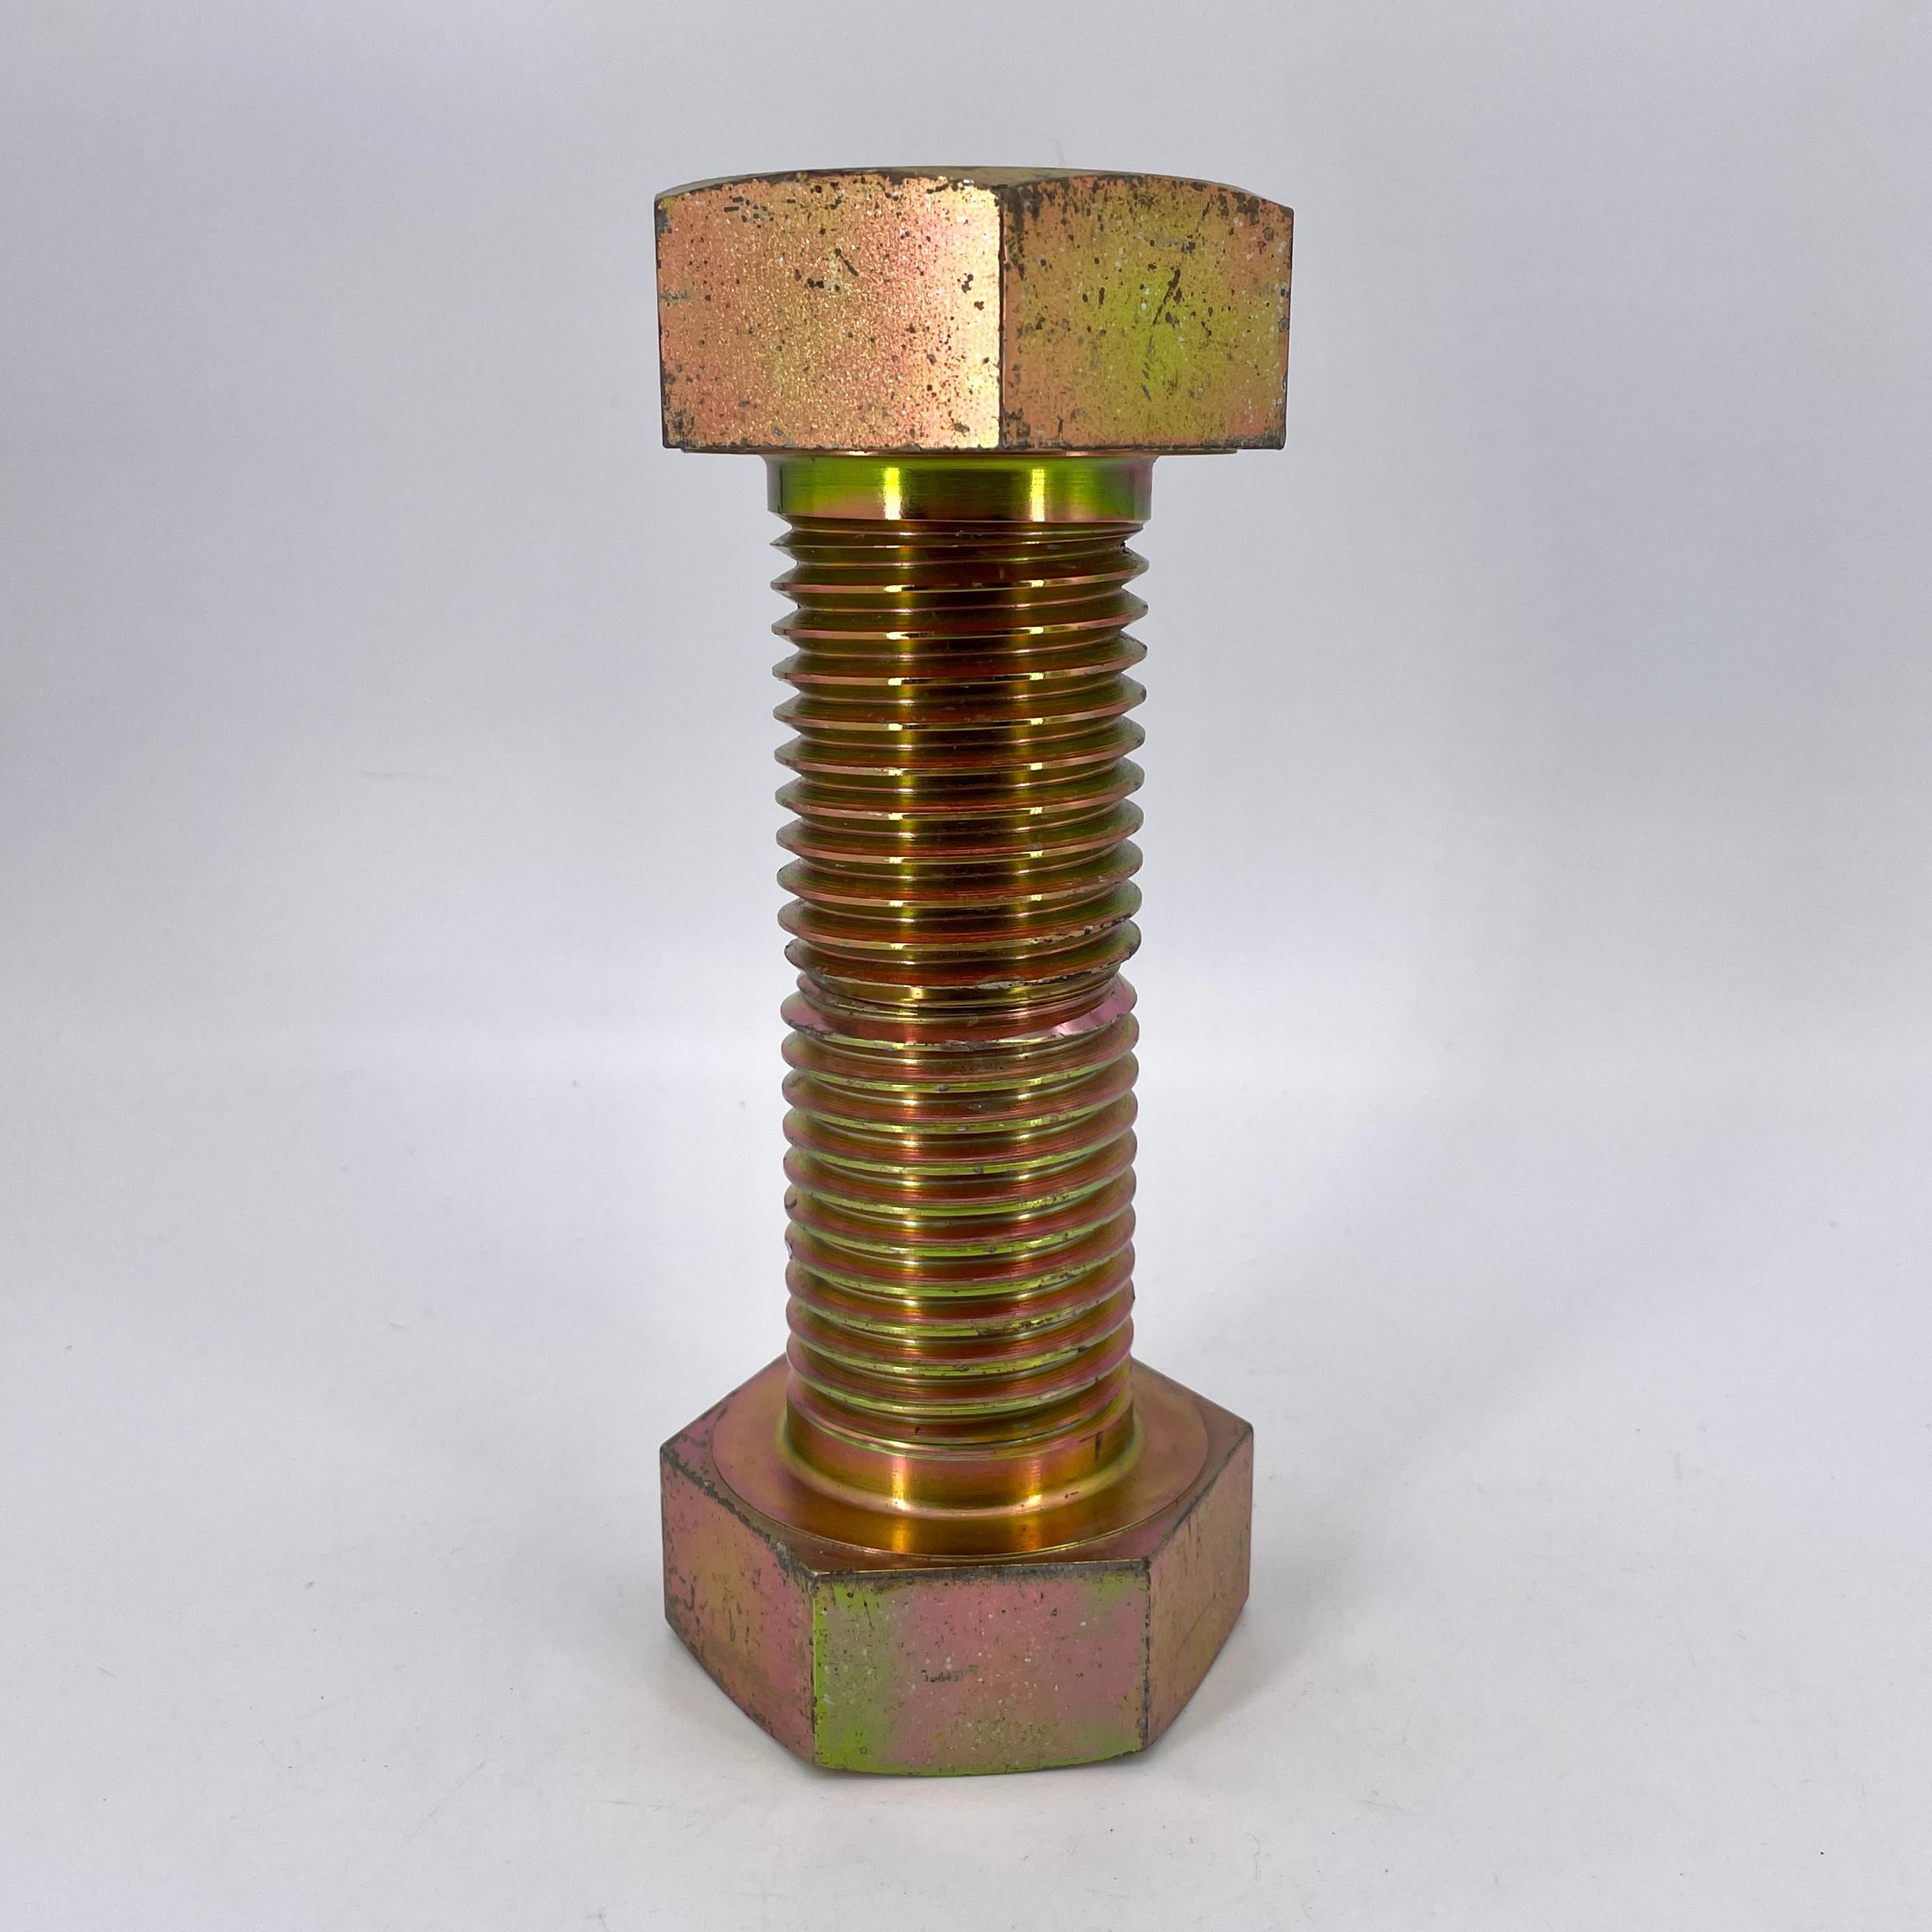 Machine-Made 1980s Plated Brass Bridge Bolts Bookends Paperweights Quirky Vintage Mid-Century For Sale